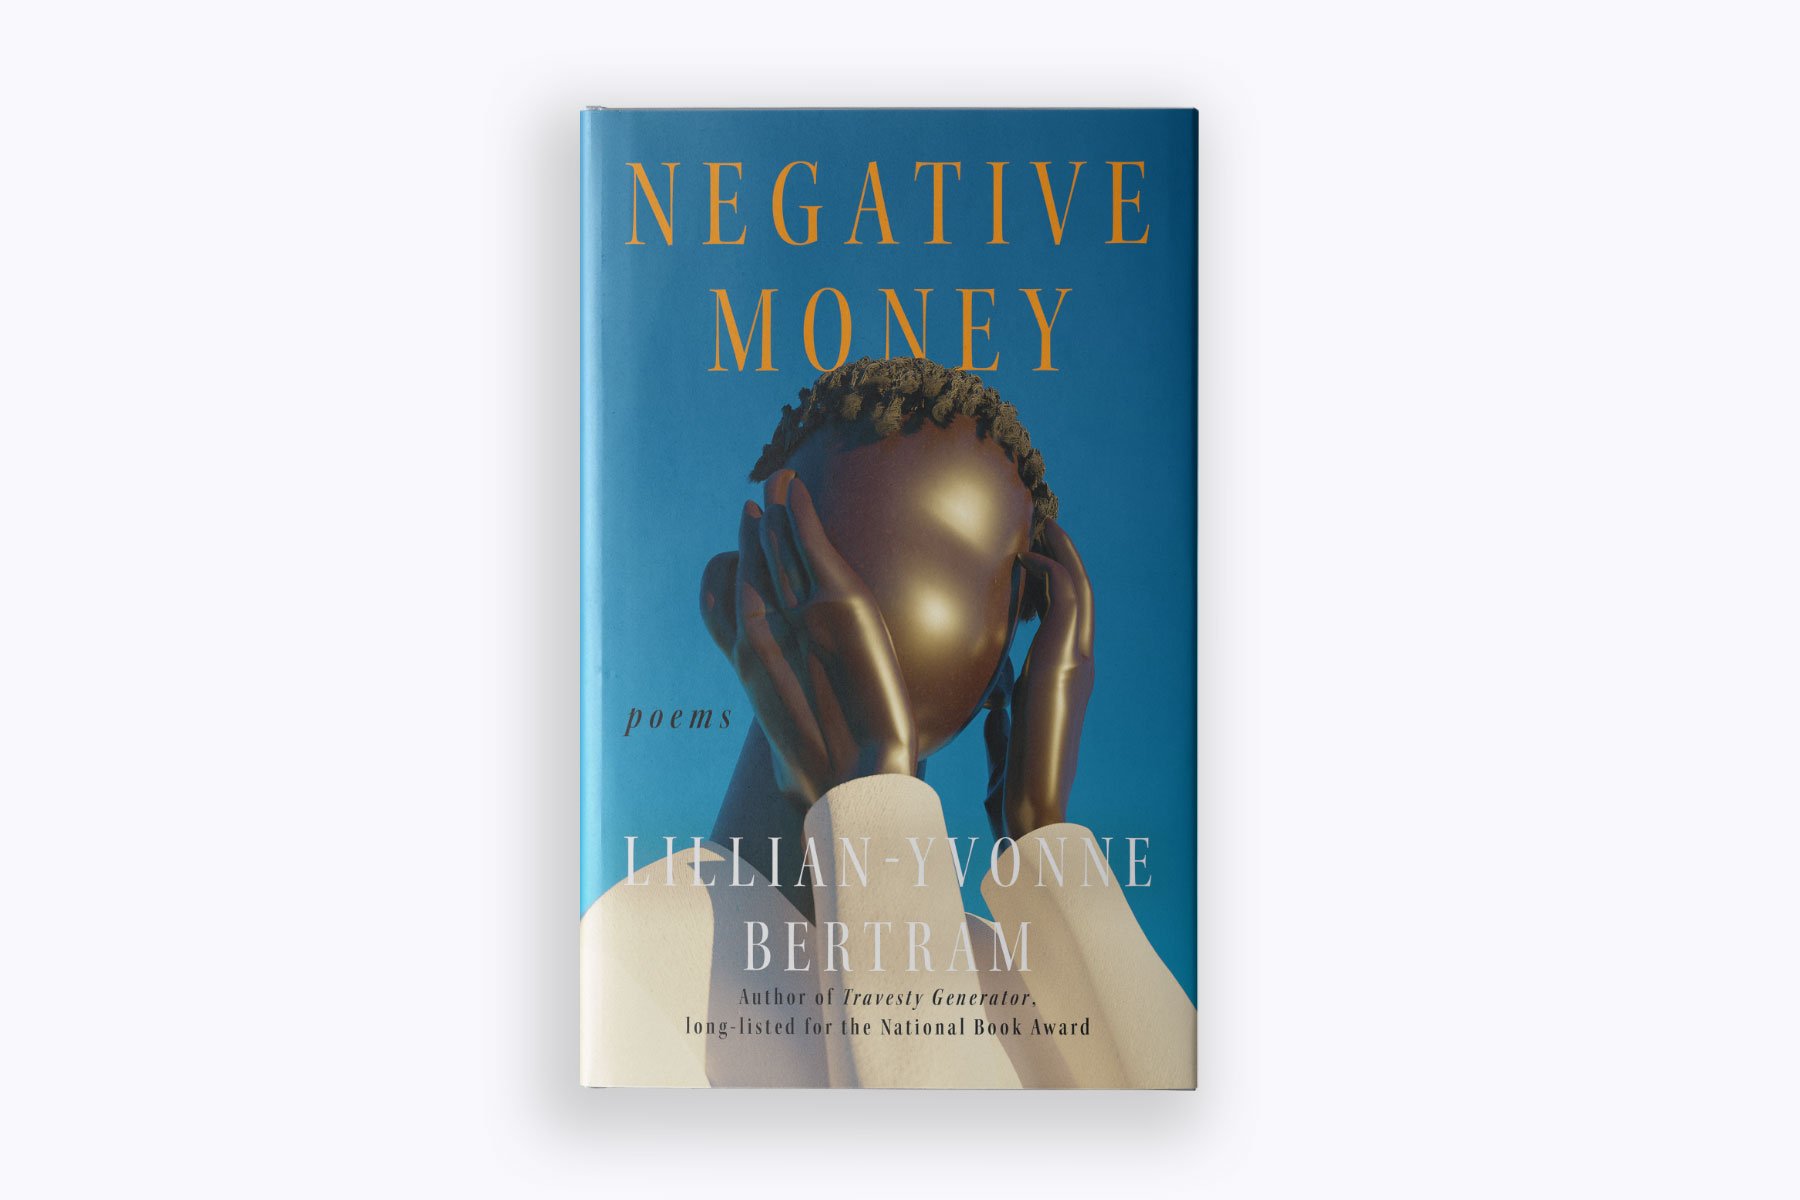 Poetry collection Negative Money explores how everything has a price